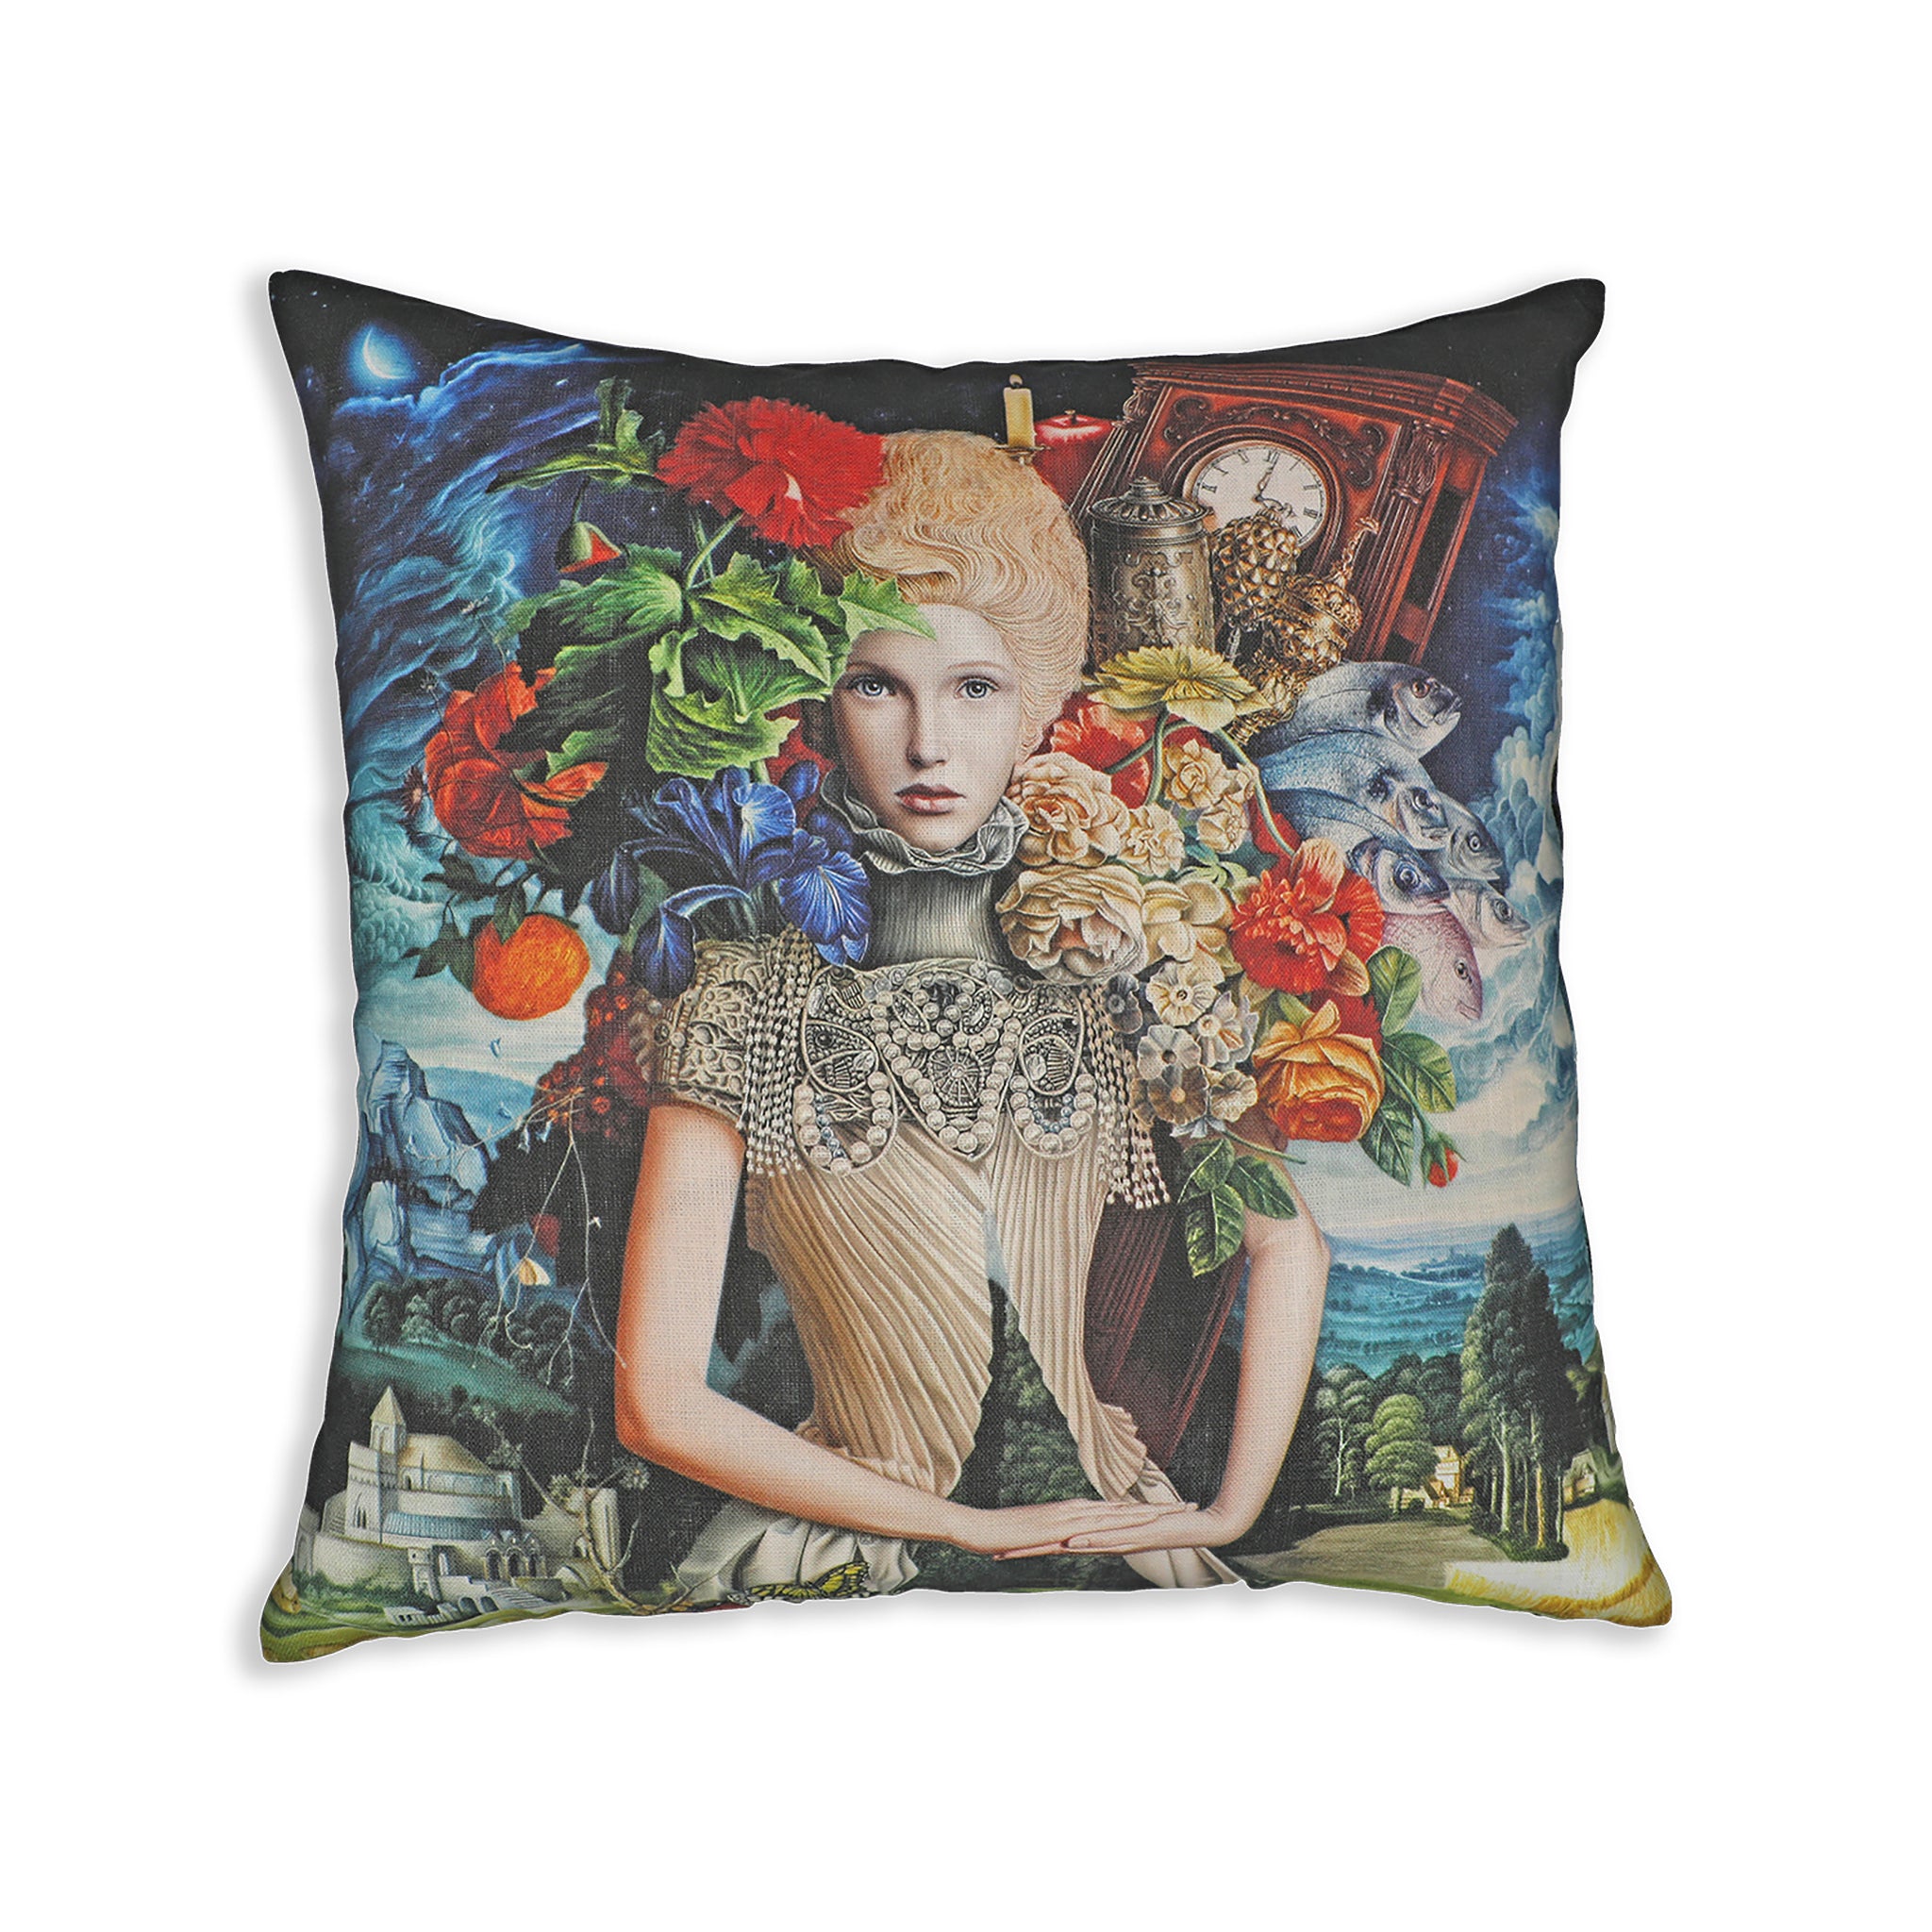 5 Ways Art Cushion Covers Can Transform Your Living Space